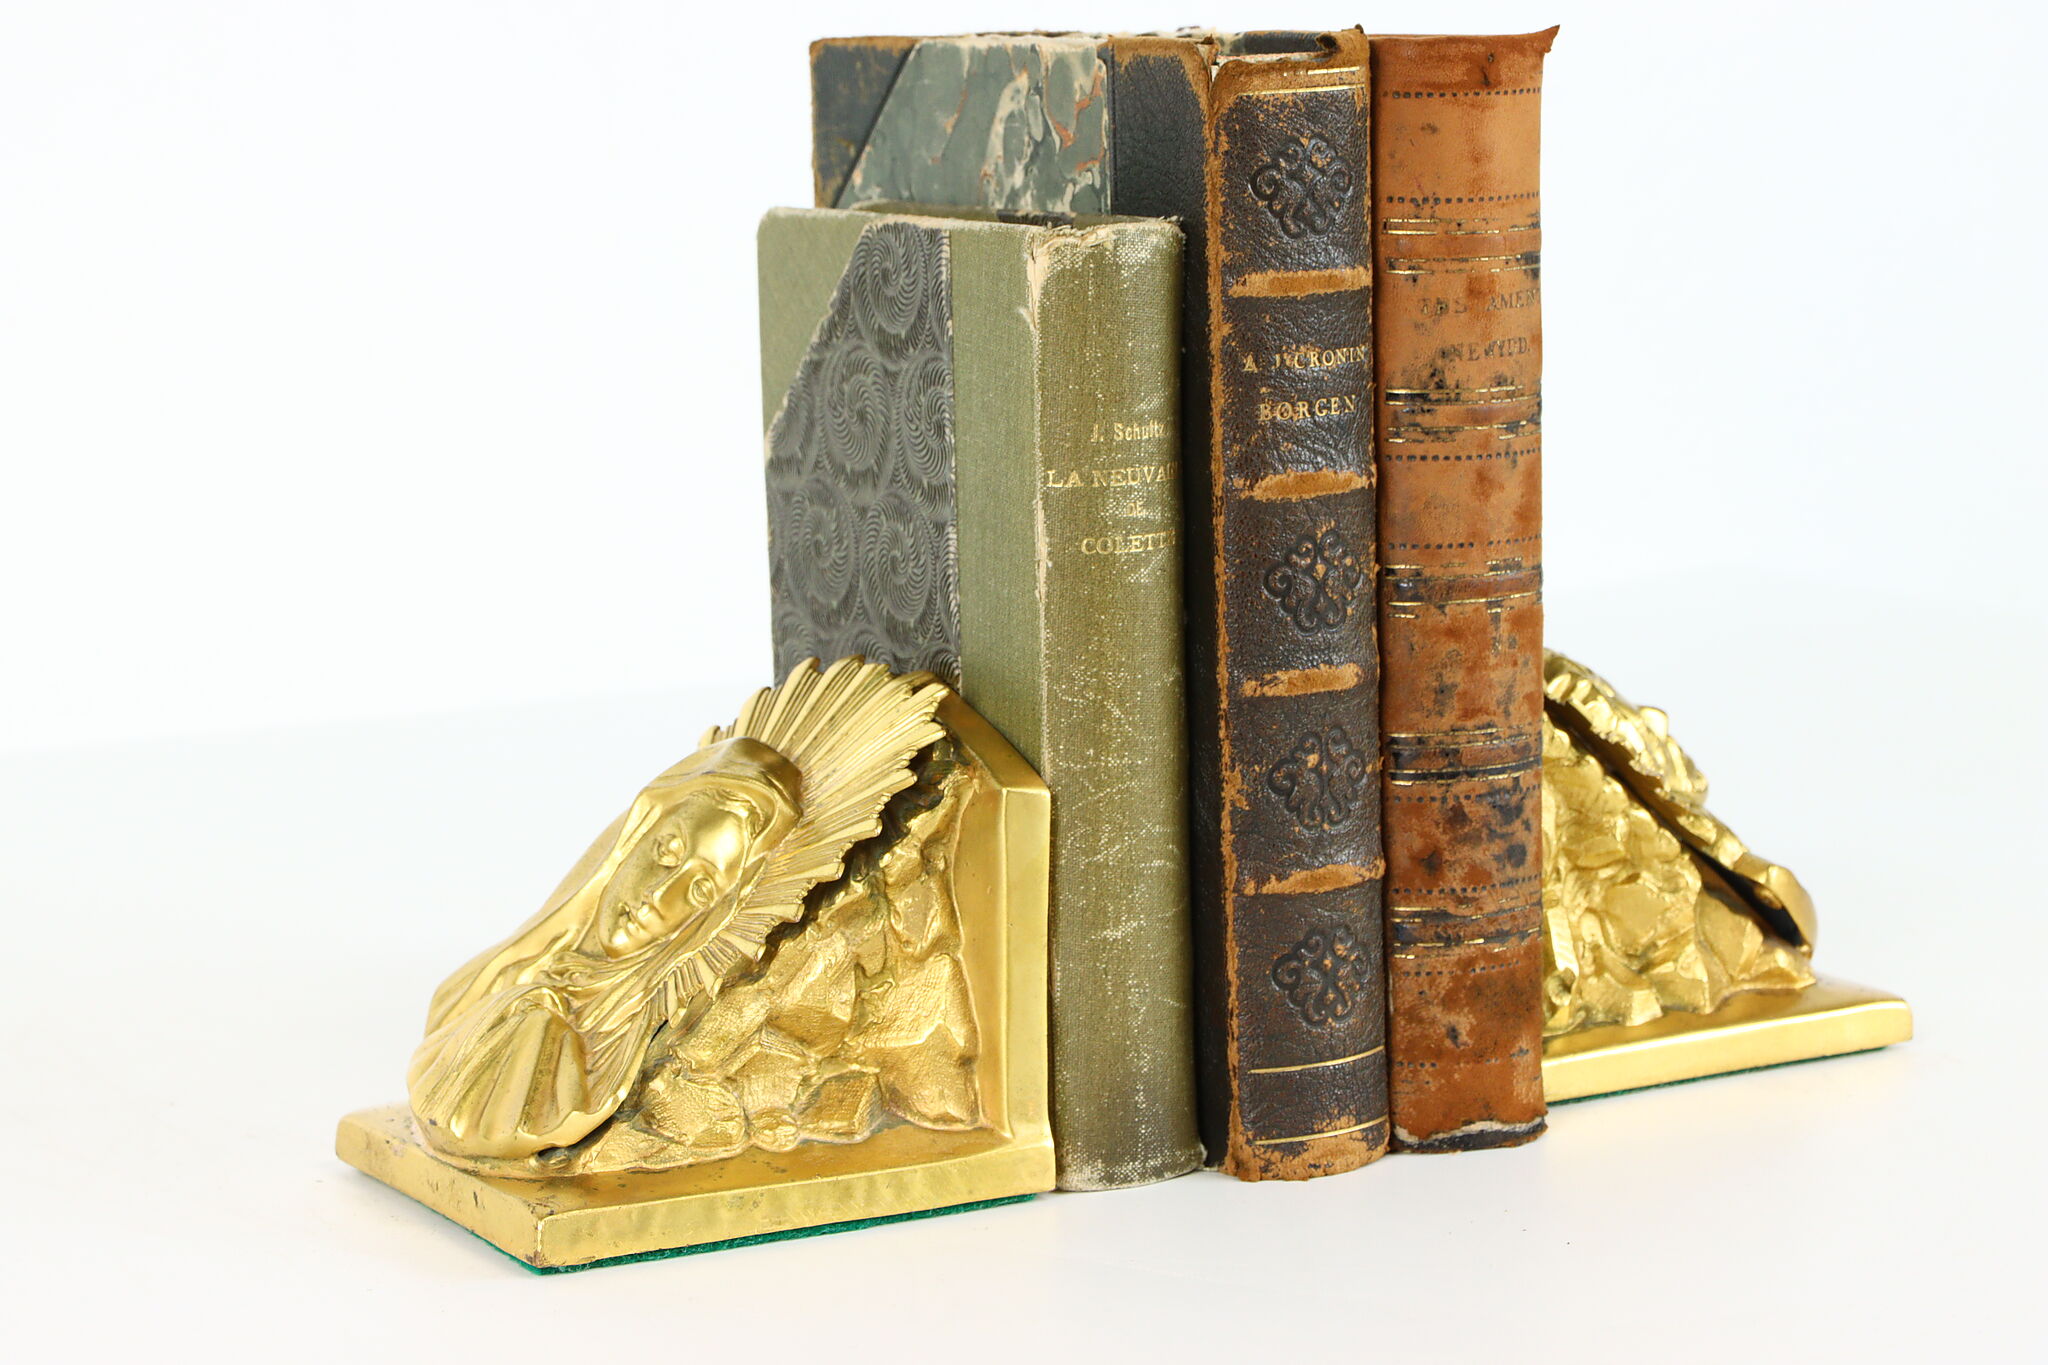 Pair of Antique Mary Madonna & Jesus Gold Bookends, Aronson 1922